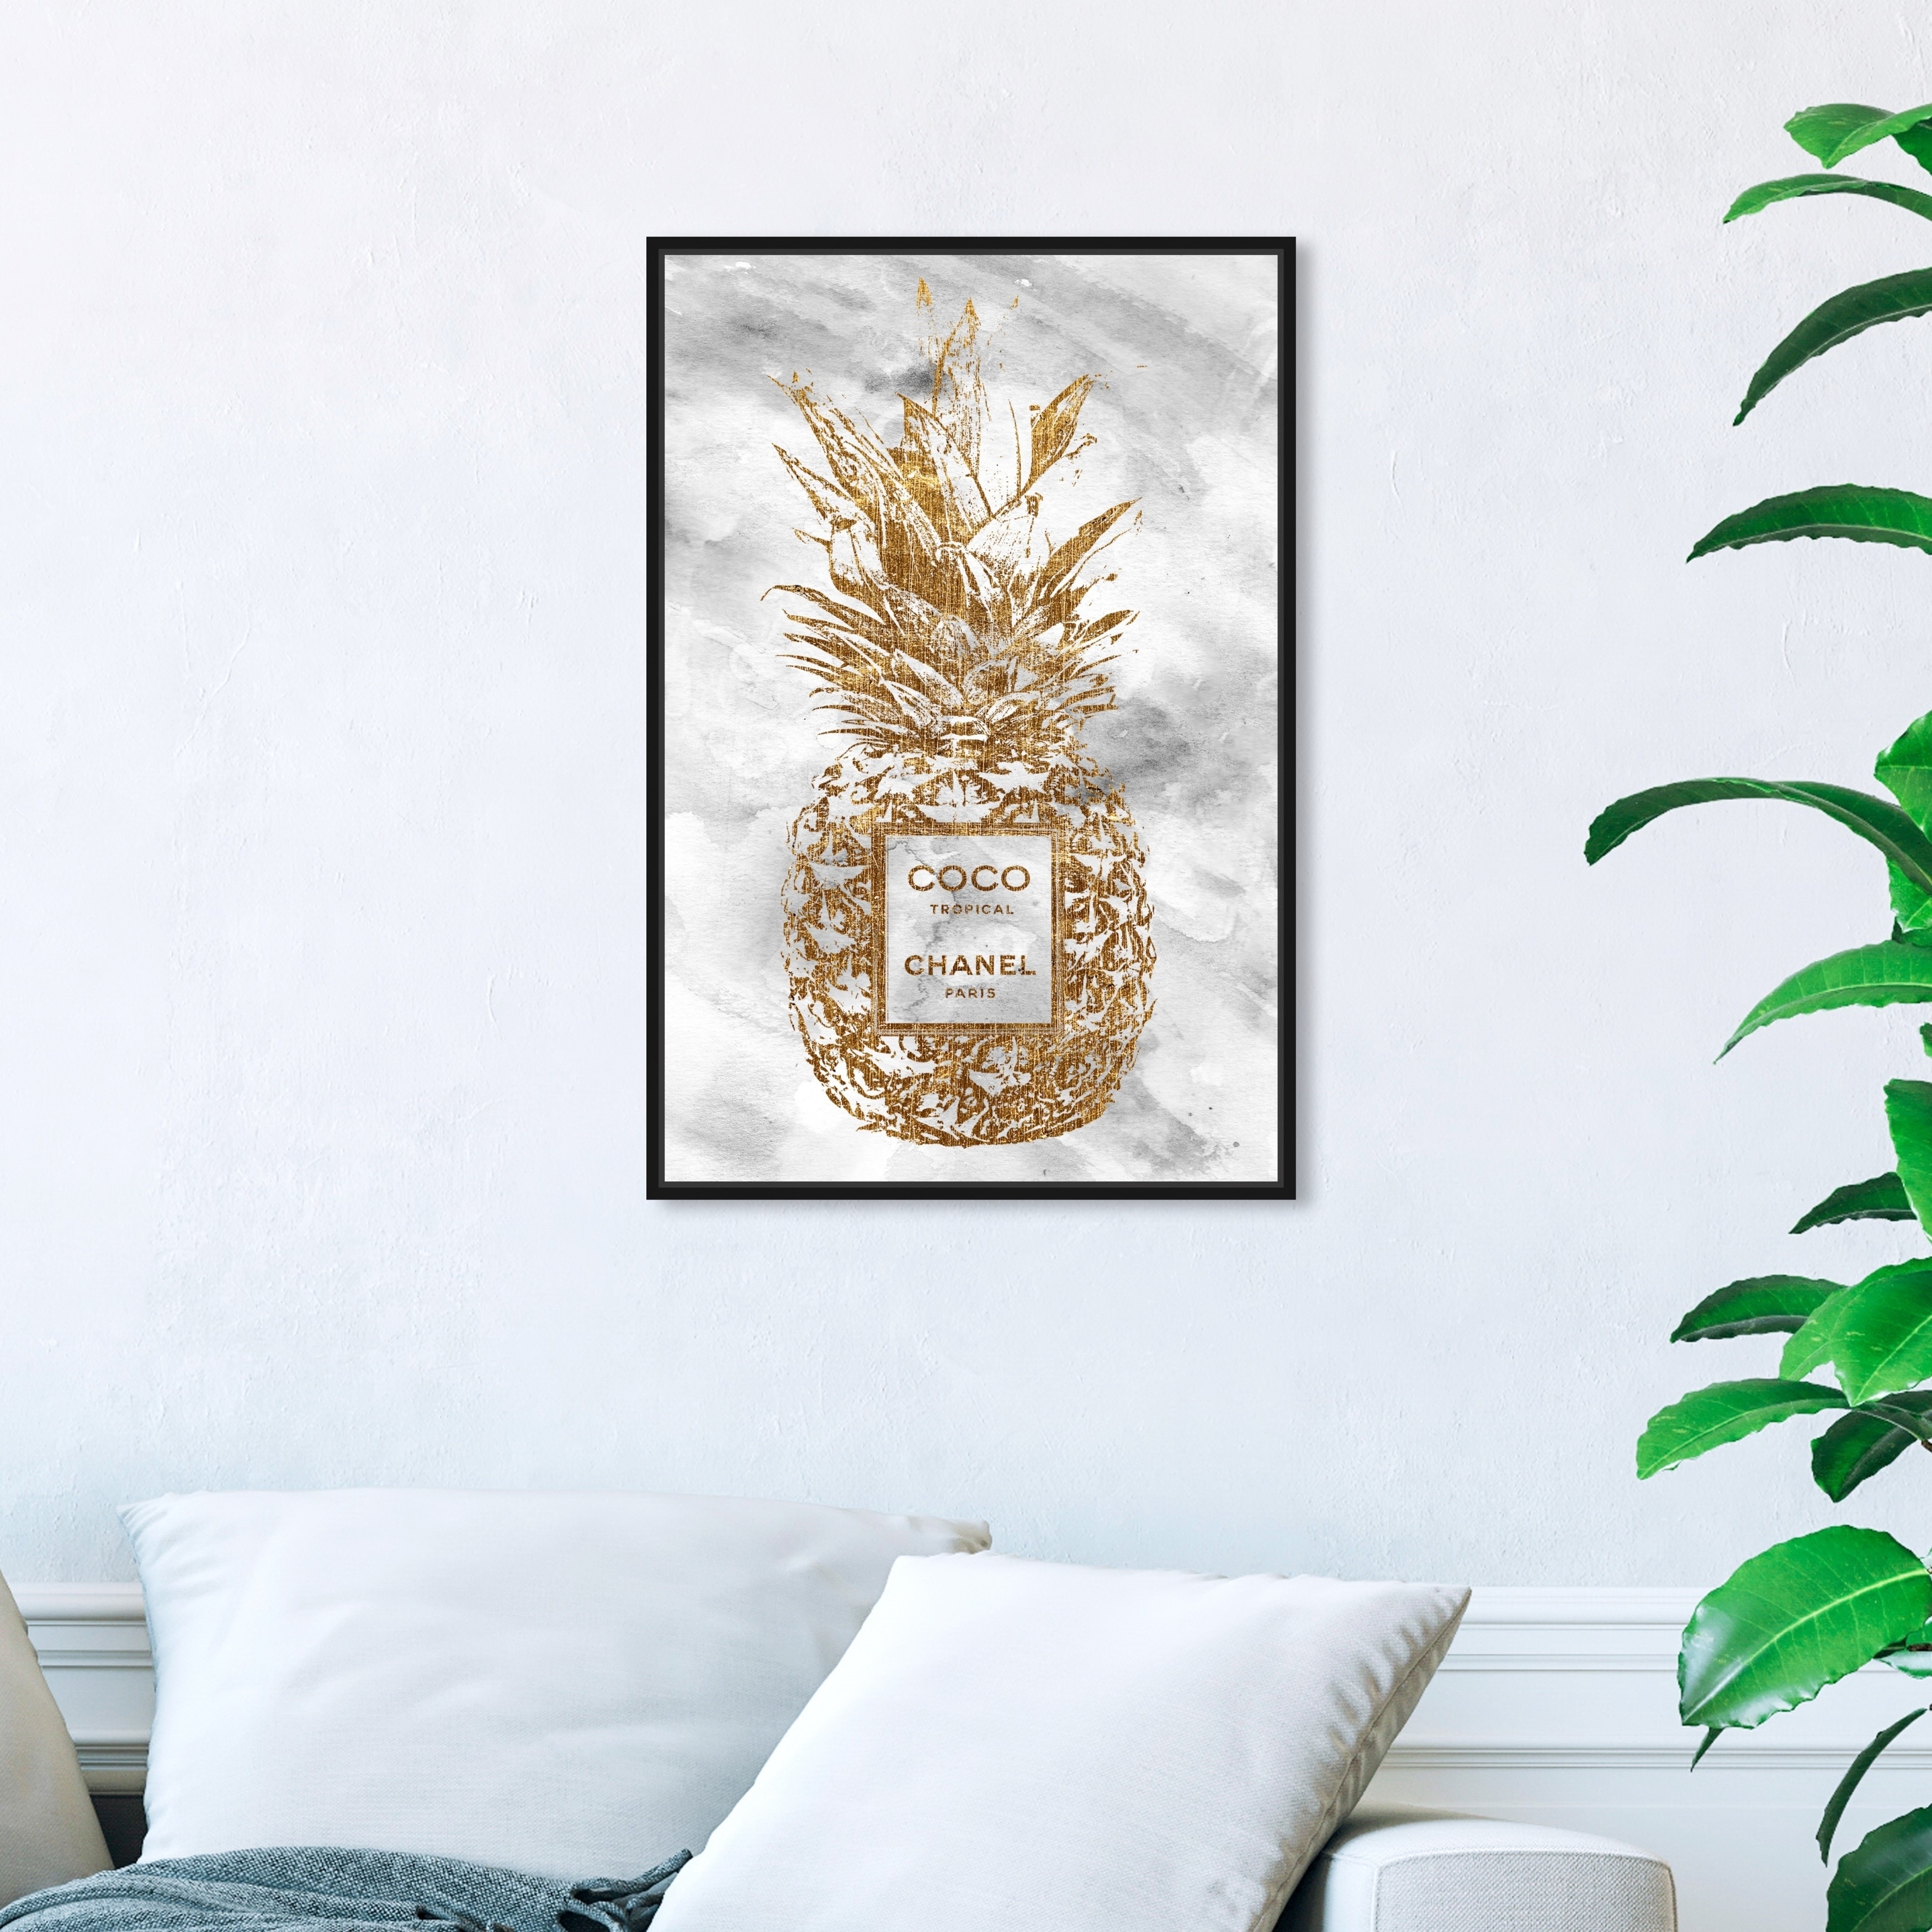 Oliver Gal Fashion and Glam Wall Art Framed Canvas Prints 'Coco Tropical' Fashion  Lifestyle - Gold, White - Bed Bath & Beyond - 30897227